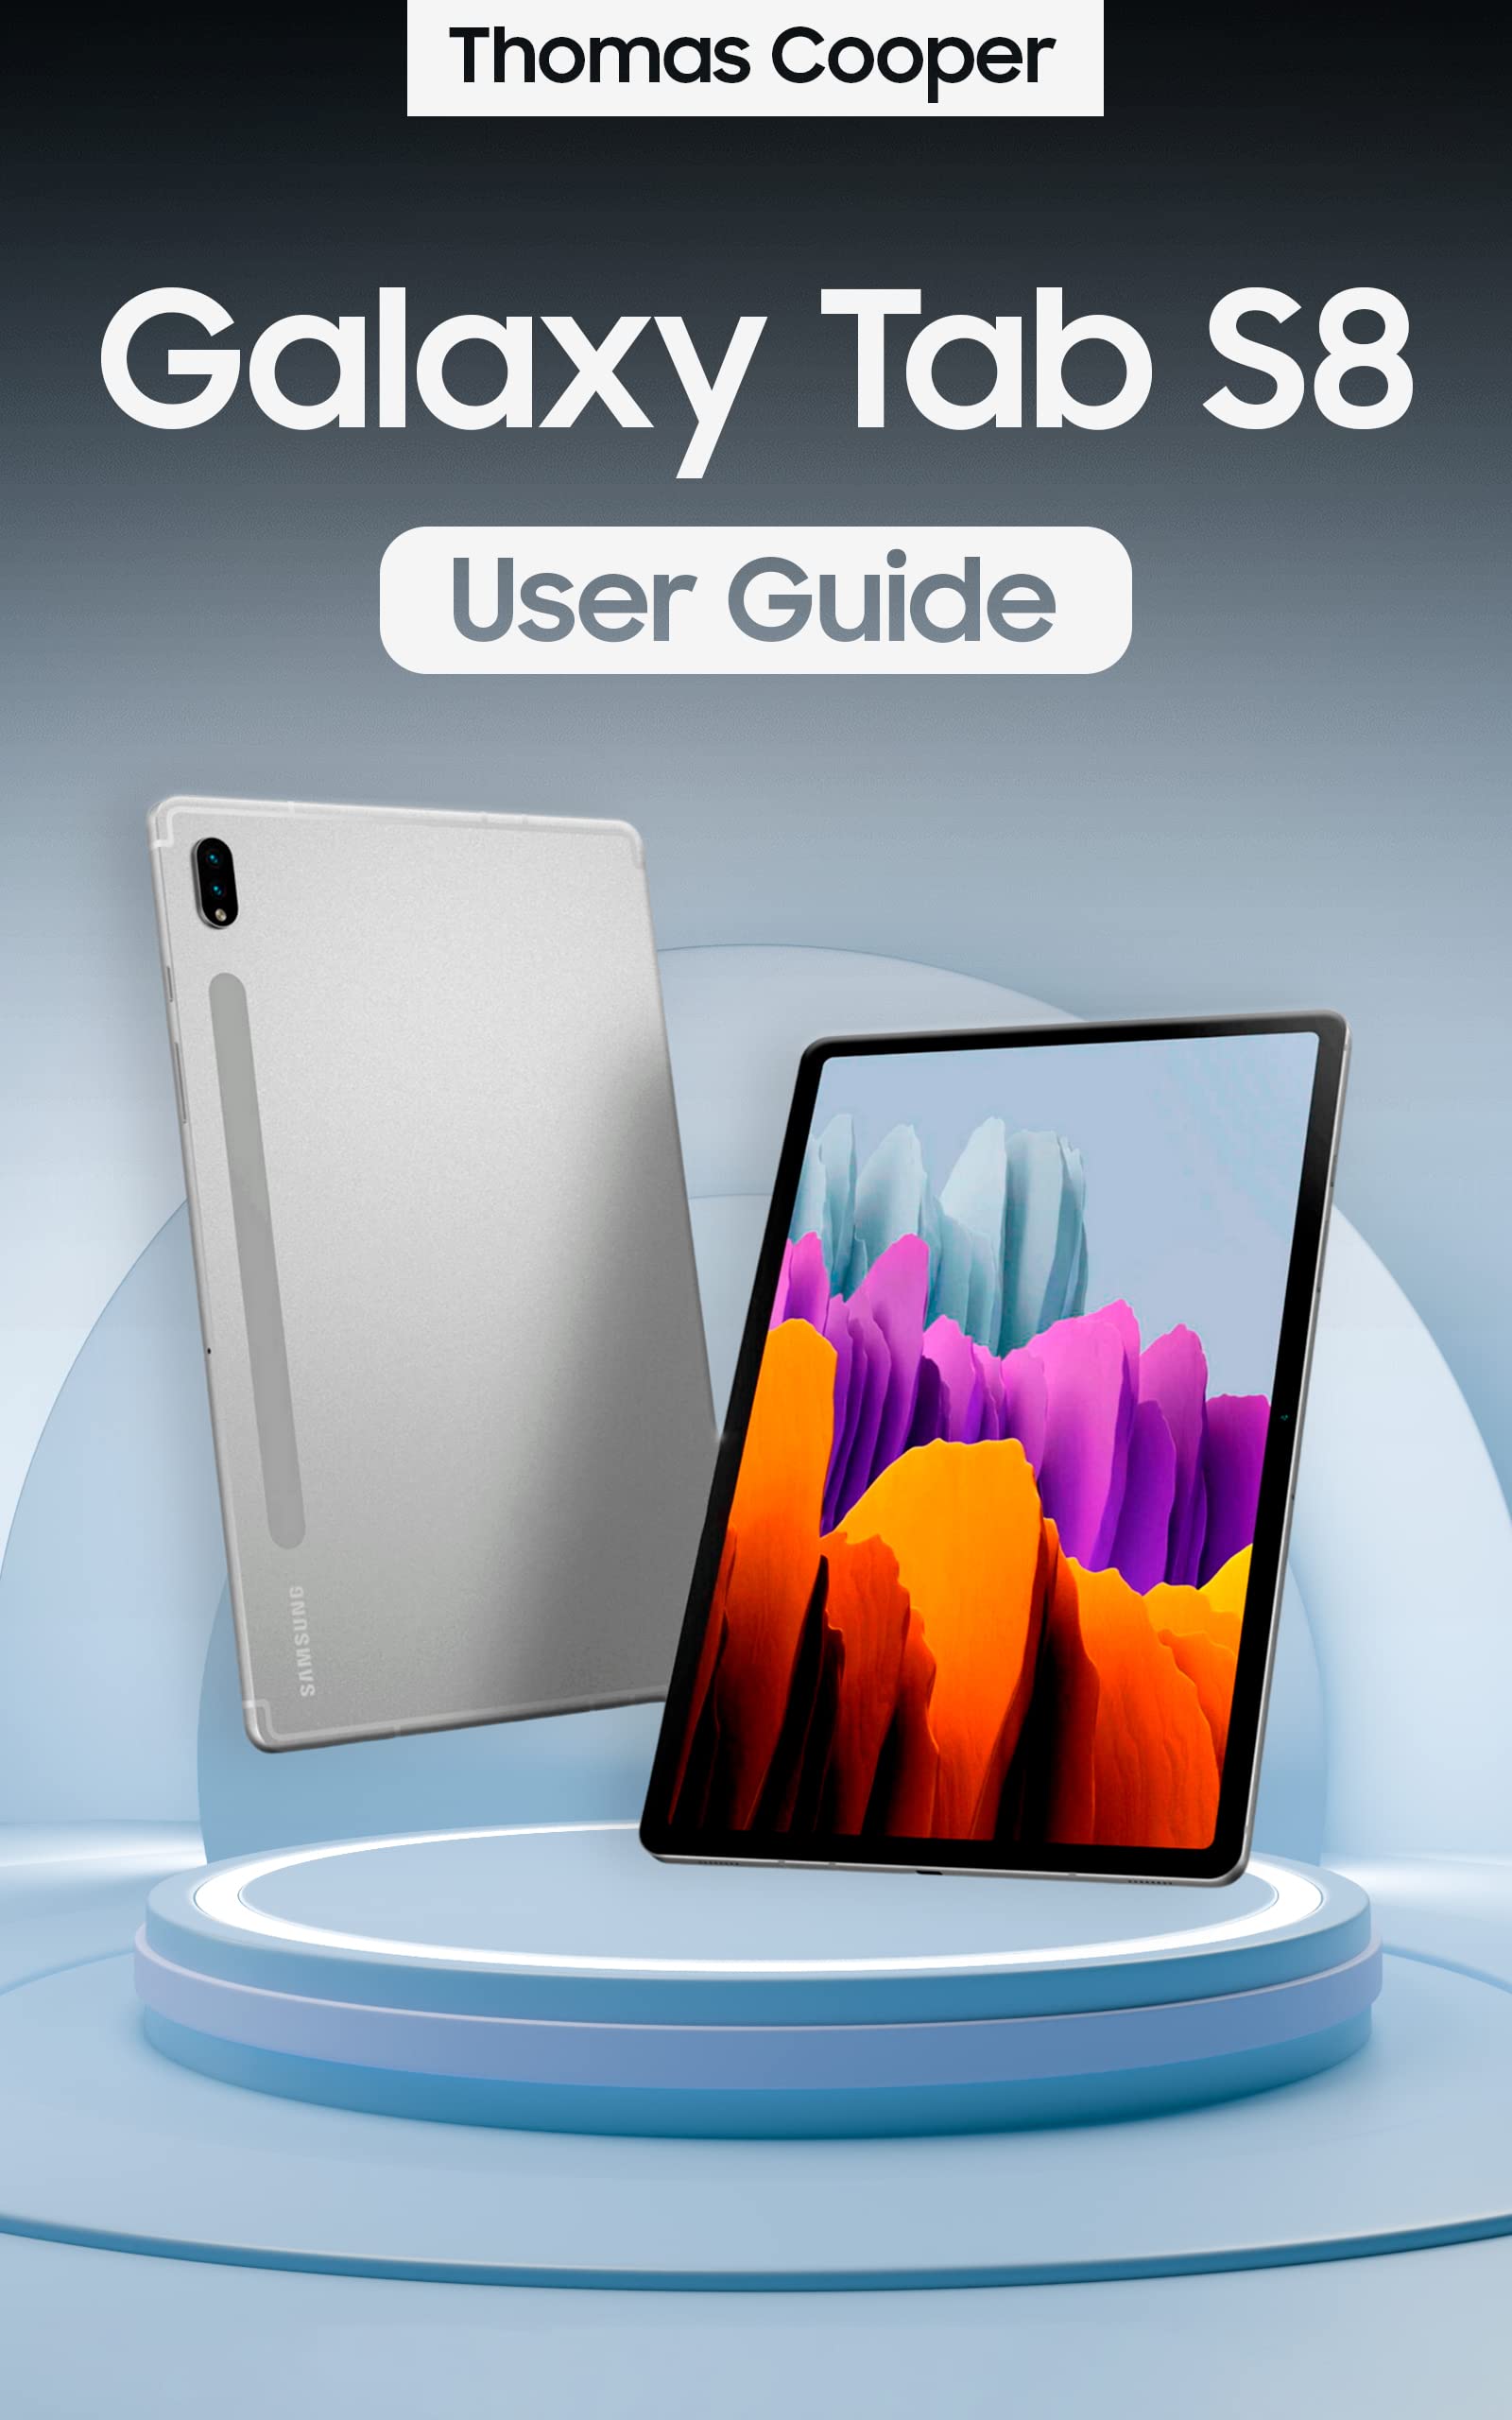 Galaxy Tab S8 User Guide: User Guide and Detailed Instructions for Galaxy Tab S8, Galaxy Tab S8 Ultra, and Galaxy Tab S8+